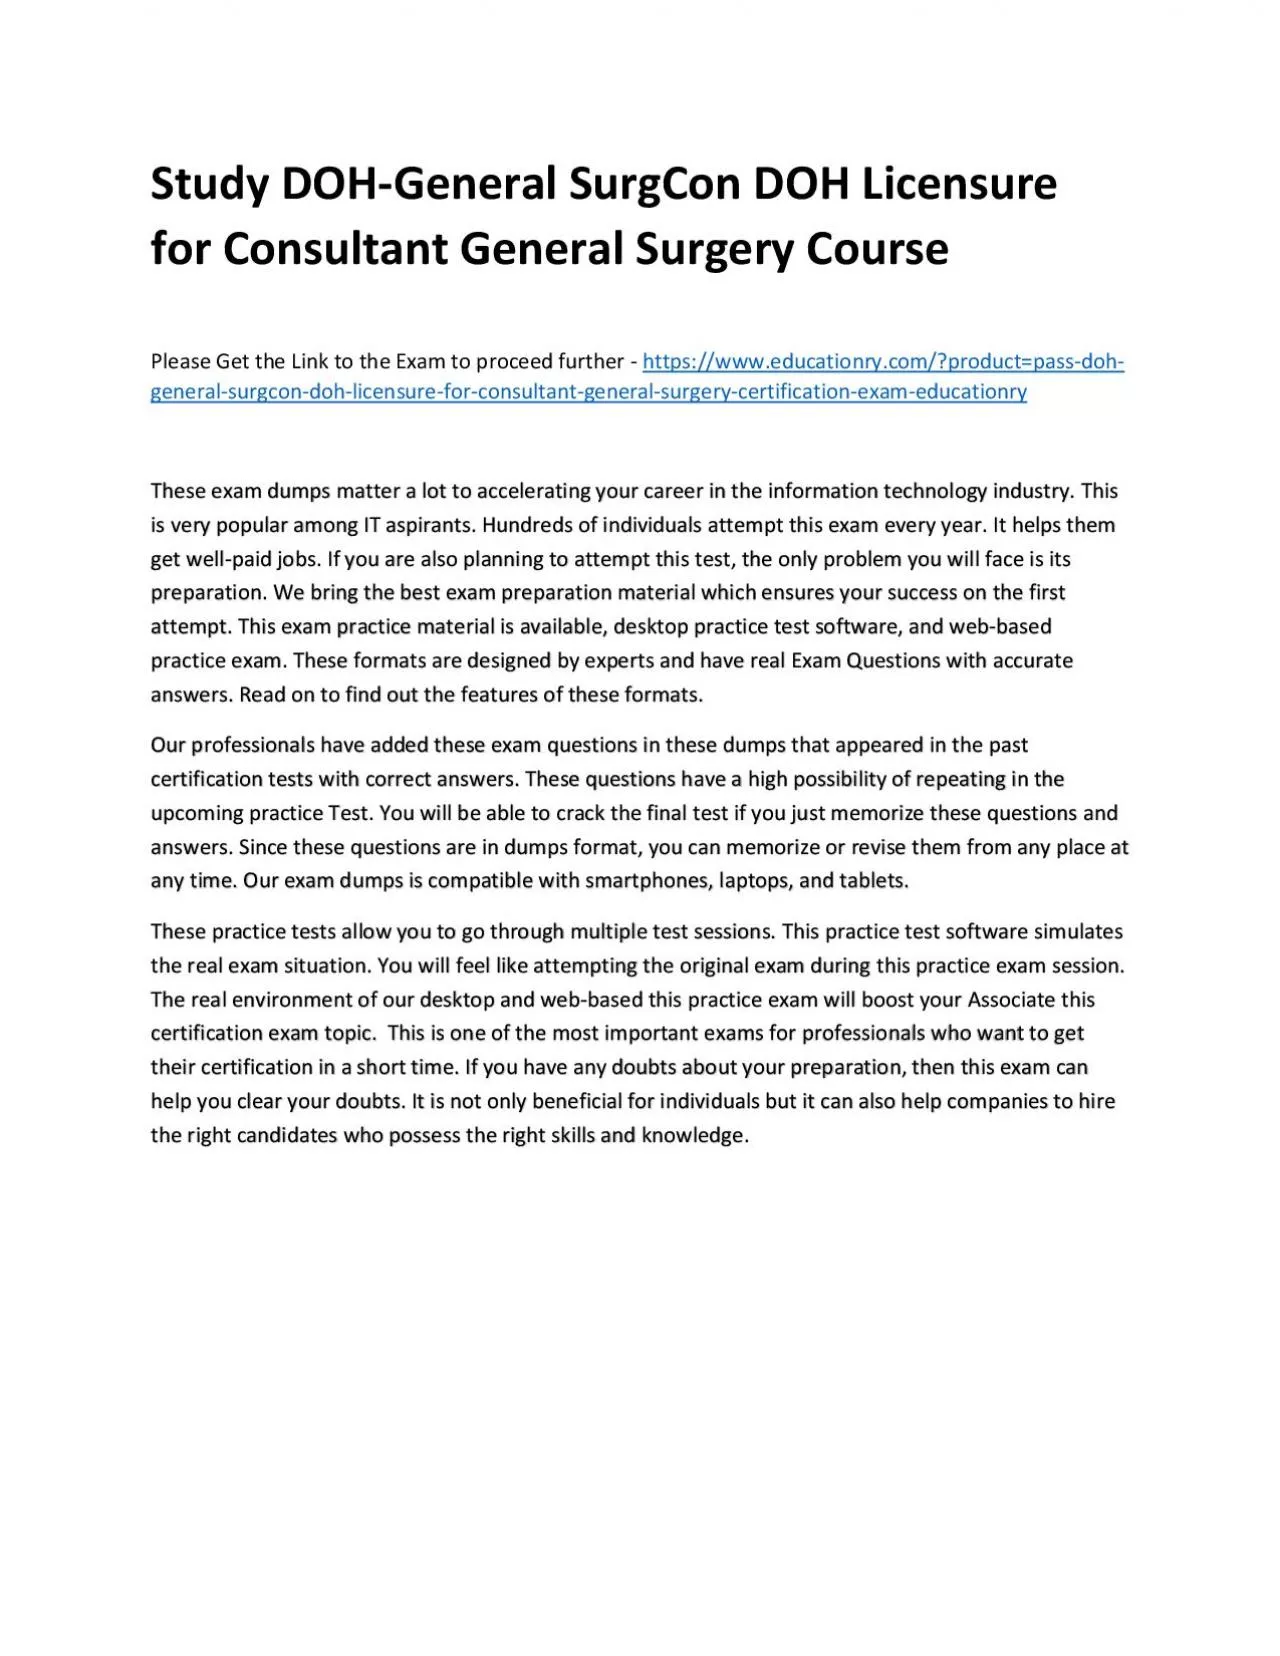 Study DOH-General SurgCon DOH Licensure for Consultant General Surgery Practice Course